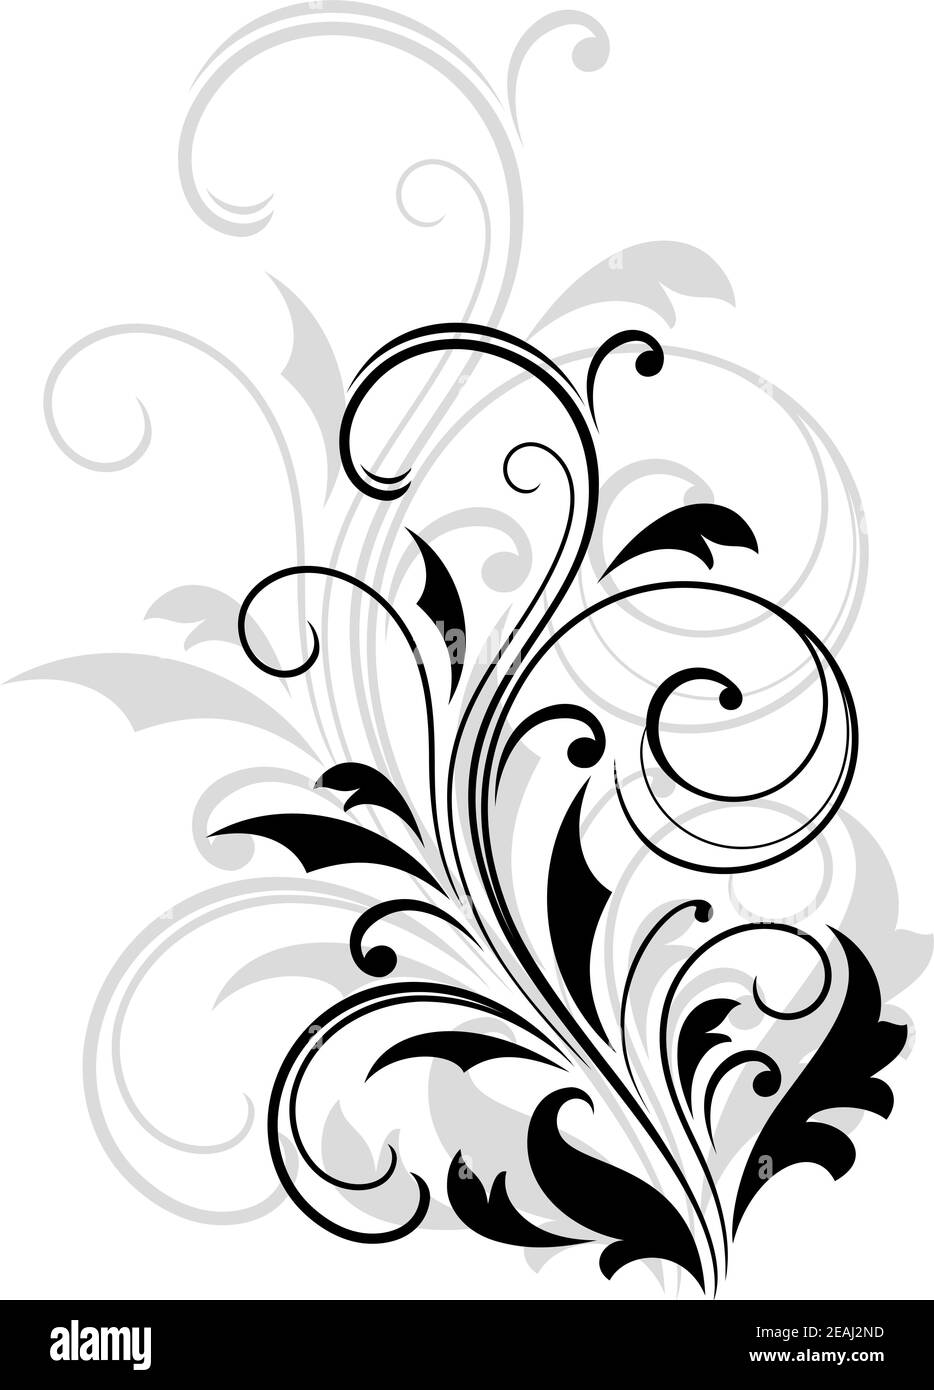 Dainty scrolling black and white floral element with a repeat enlarged design in grey behind it for an elegant vintage effect, vector illustration Stock Vector